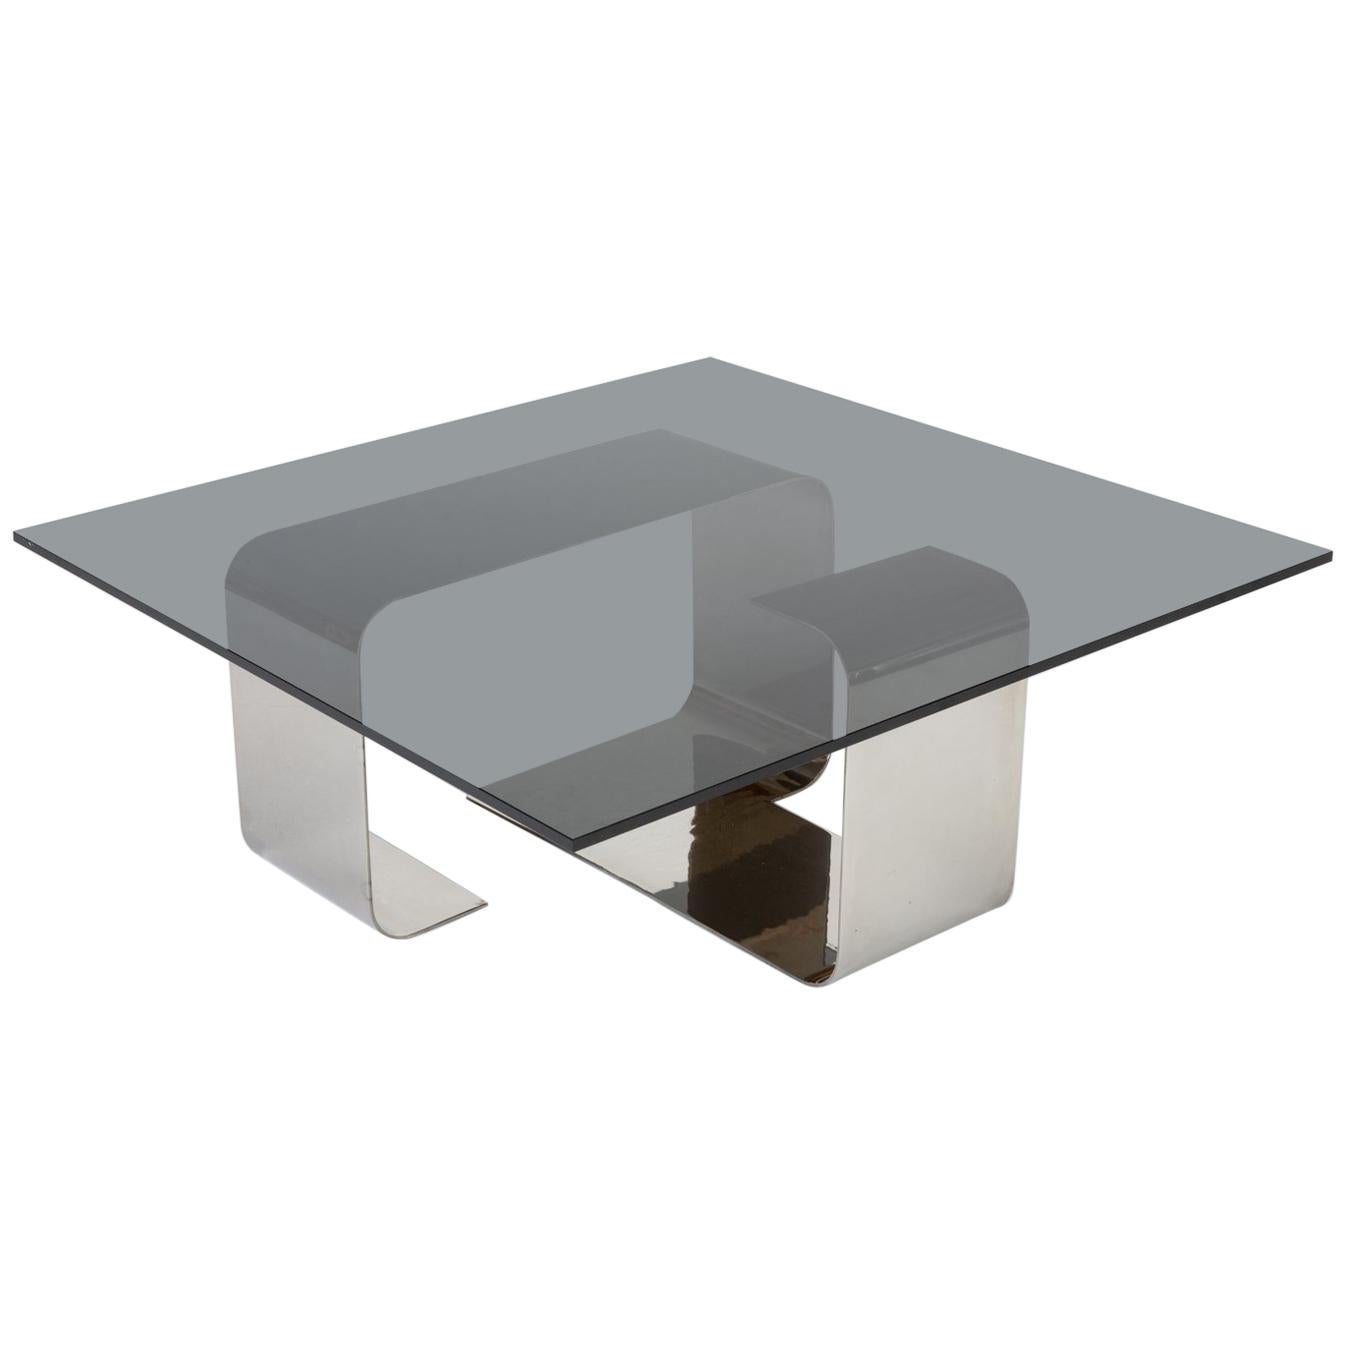 Polished Steel and Smoked Glass Coffee Table by François Monnet for Kappa